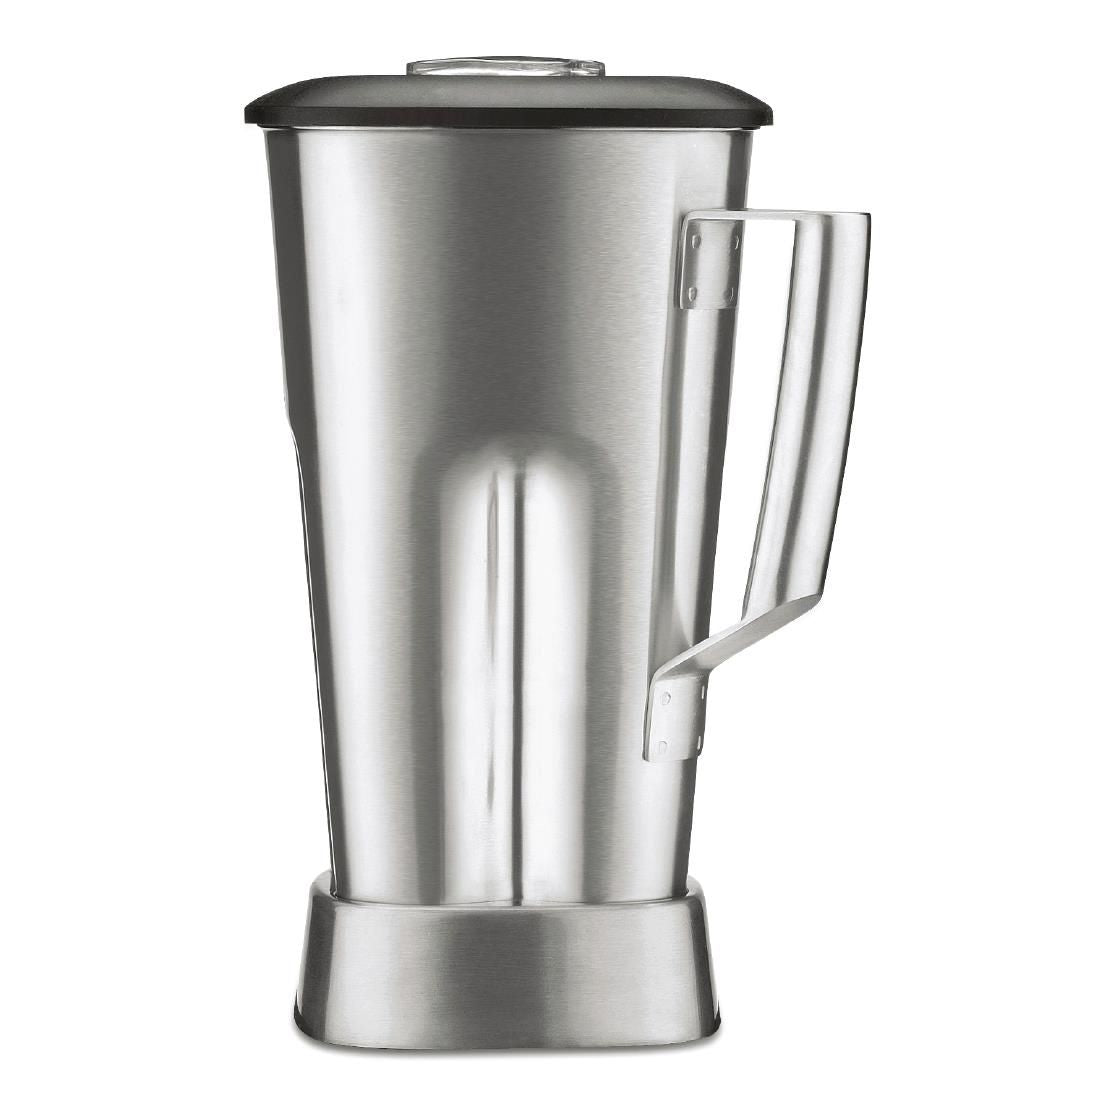 CW150 Waring 2 Litre Stainless Steel Blender Jar CAC90I JD Catering Equipment Solutions Ltd